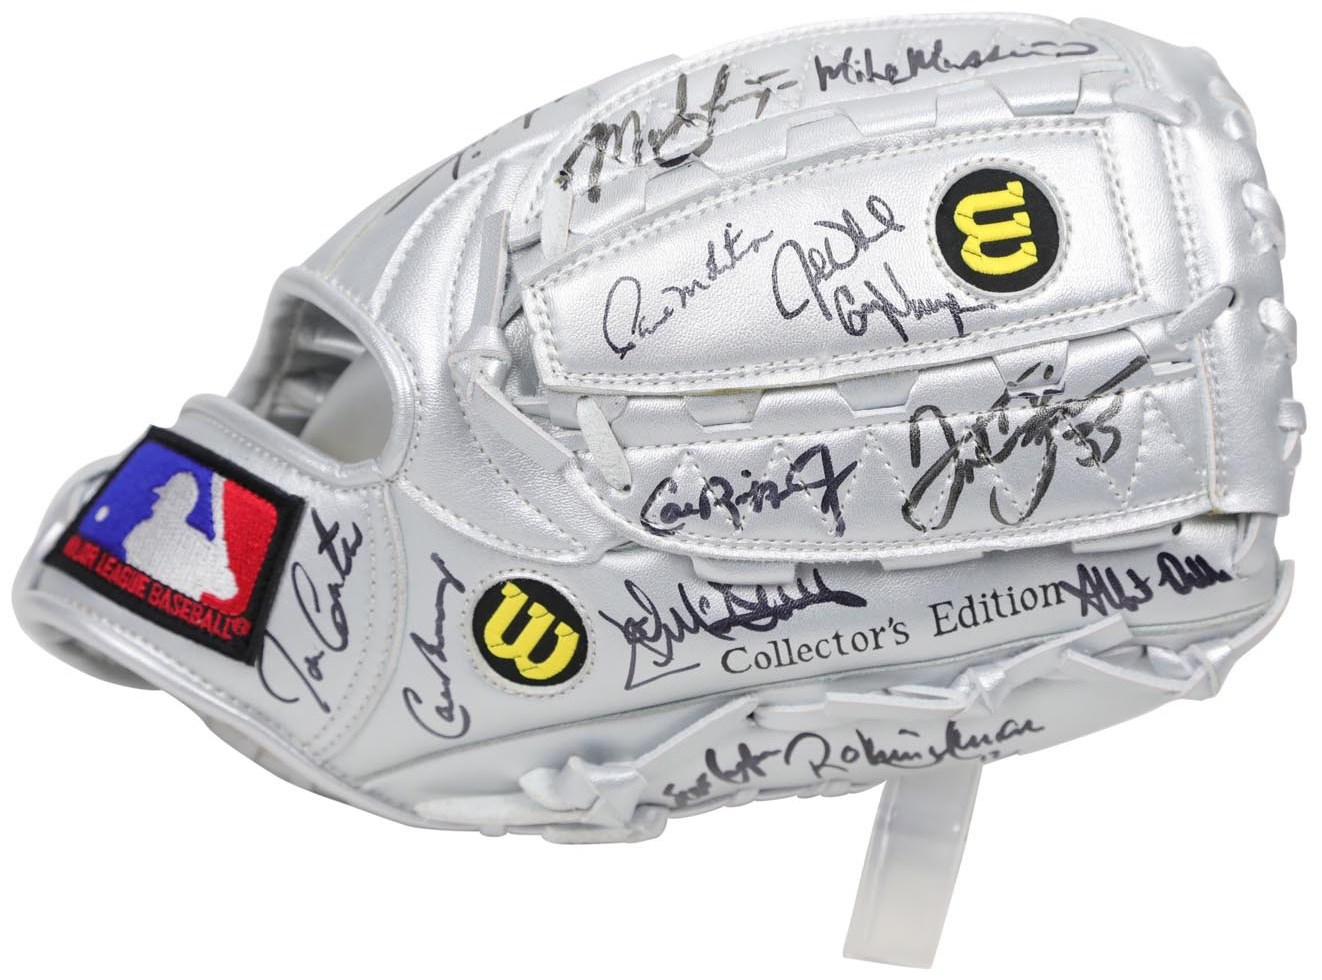 Baseball Autographs - 1993 All Star Game Signed Baseball Glove (In Person w/ MLB Provenance)